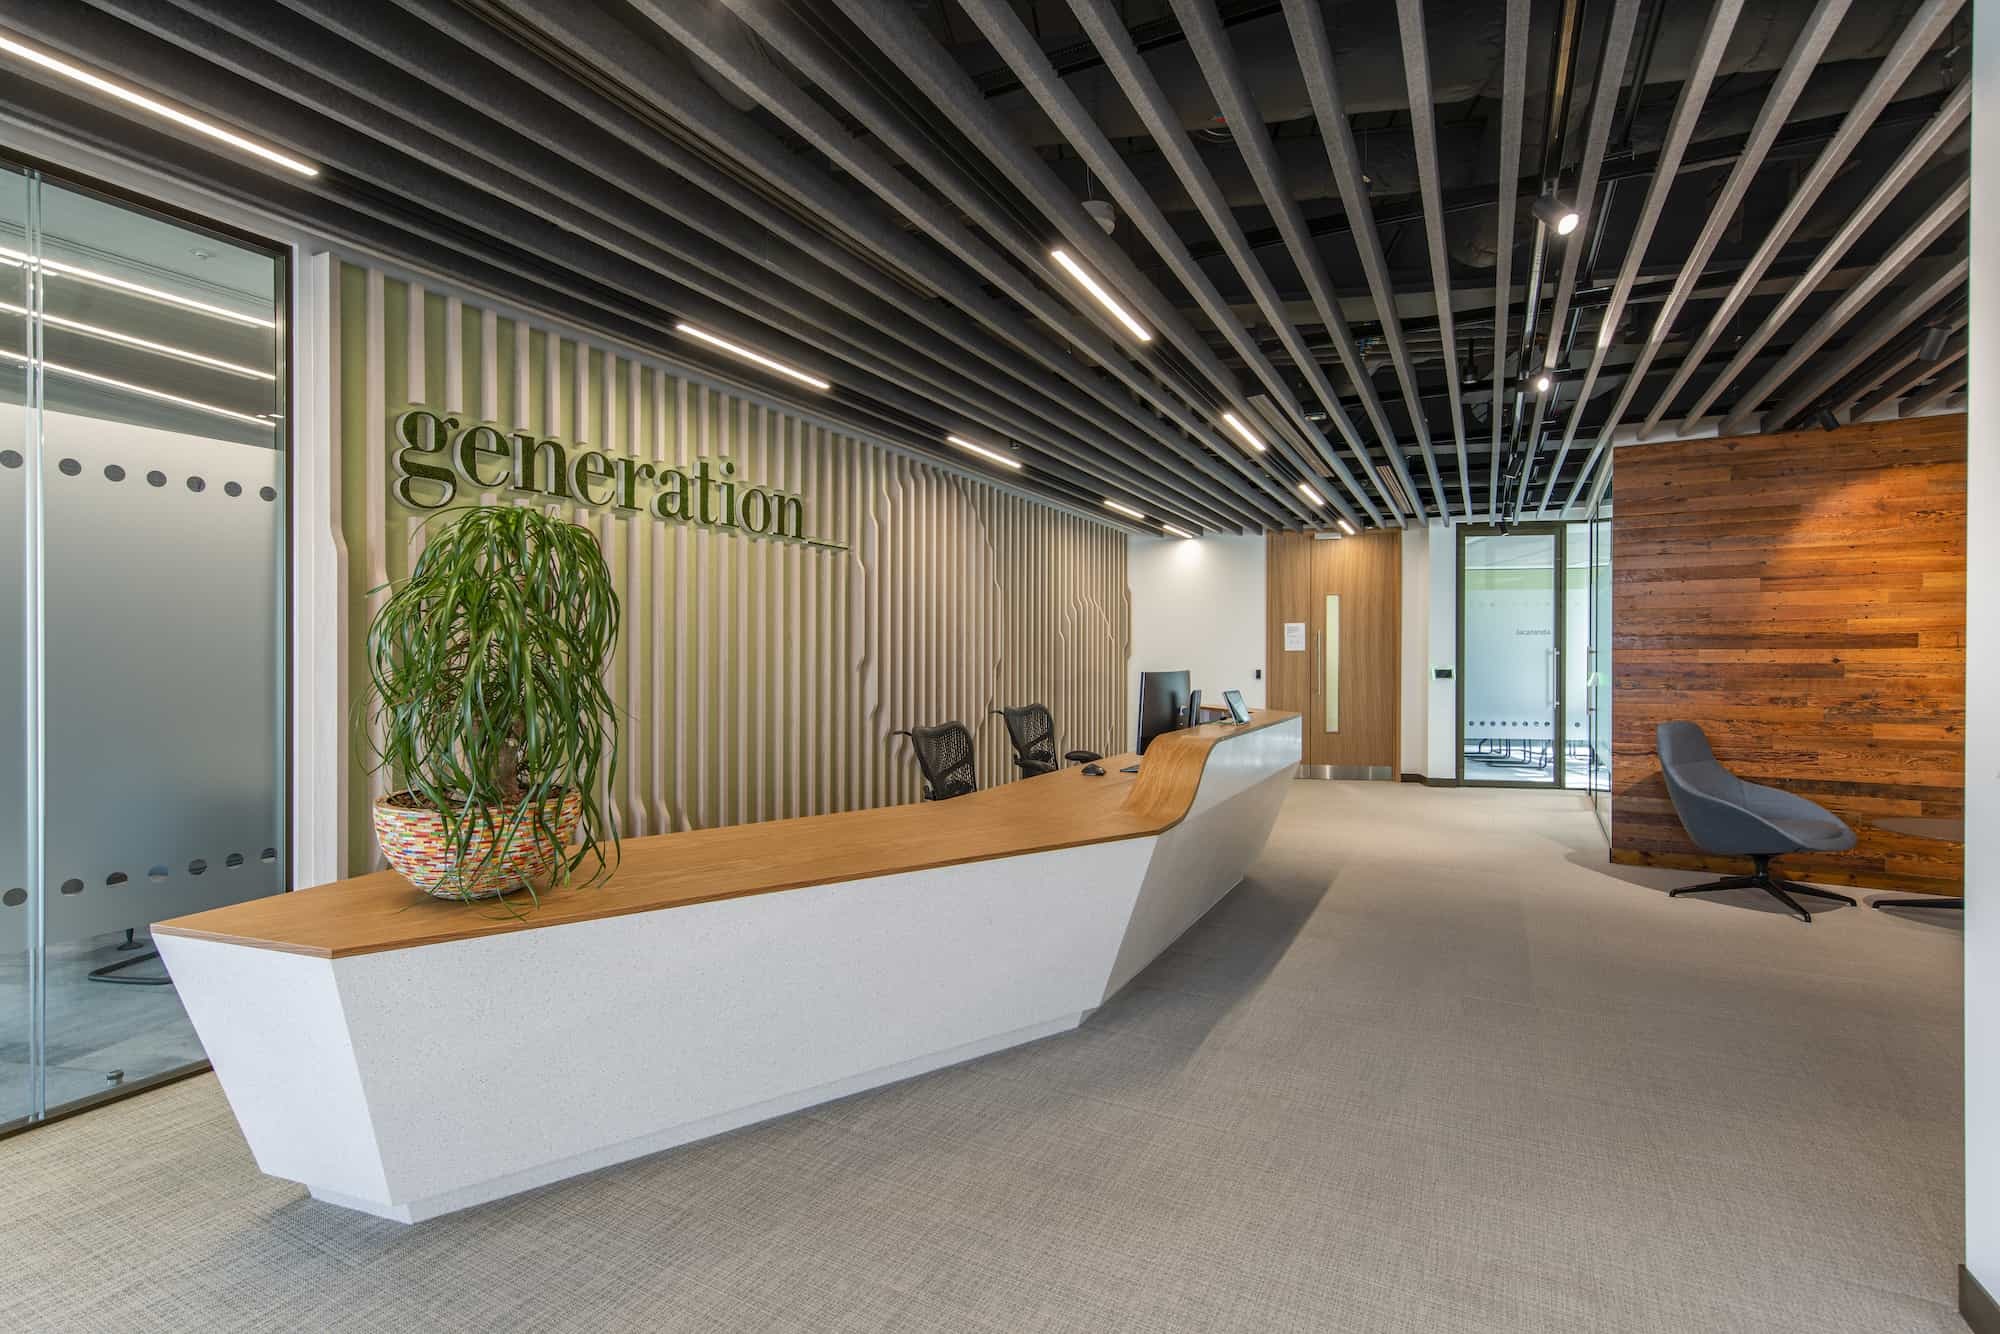 Generation-main-reception in sustainable office design